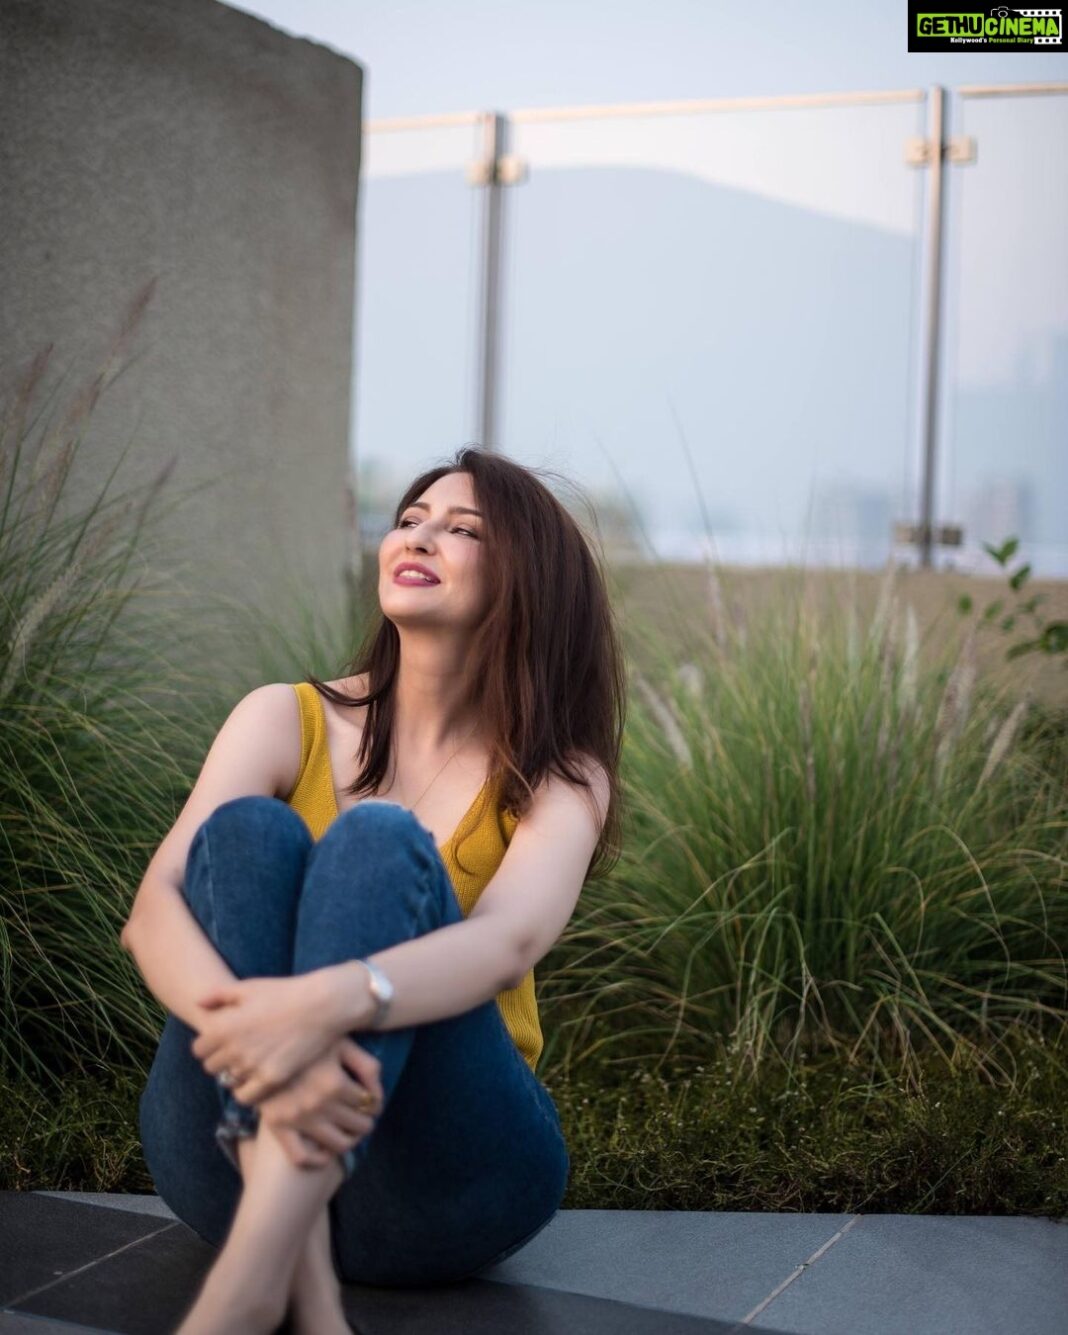 Saumya Tandon Instagram - Smile as much as possible. Count your blessings. Even if it’s tough, fight to be positive. #saturdayvibes #positivevibes #smile #stayhome